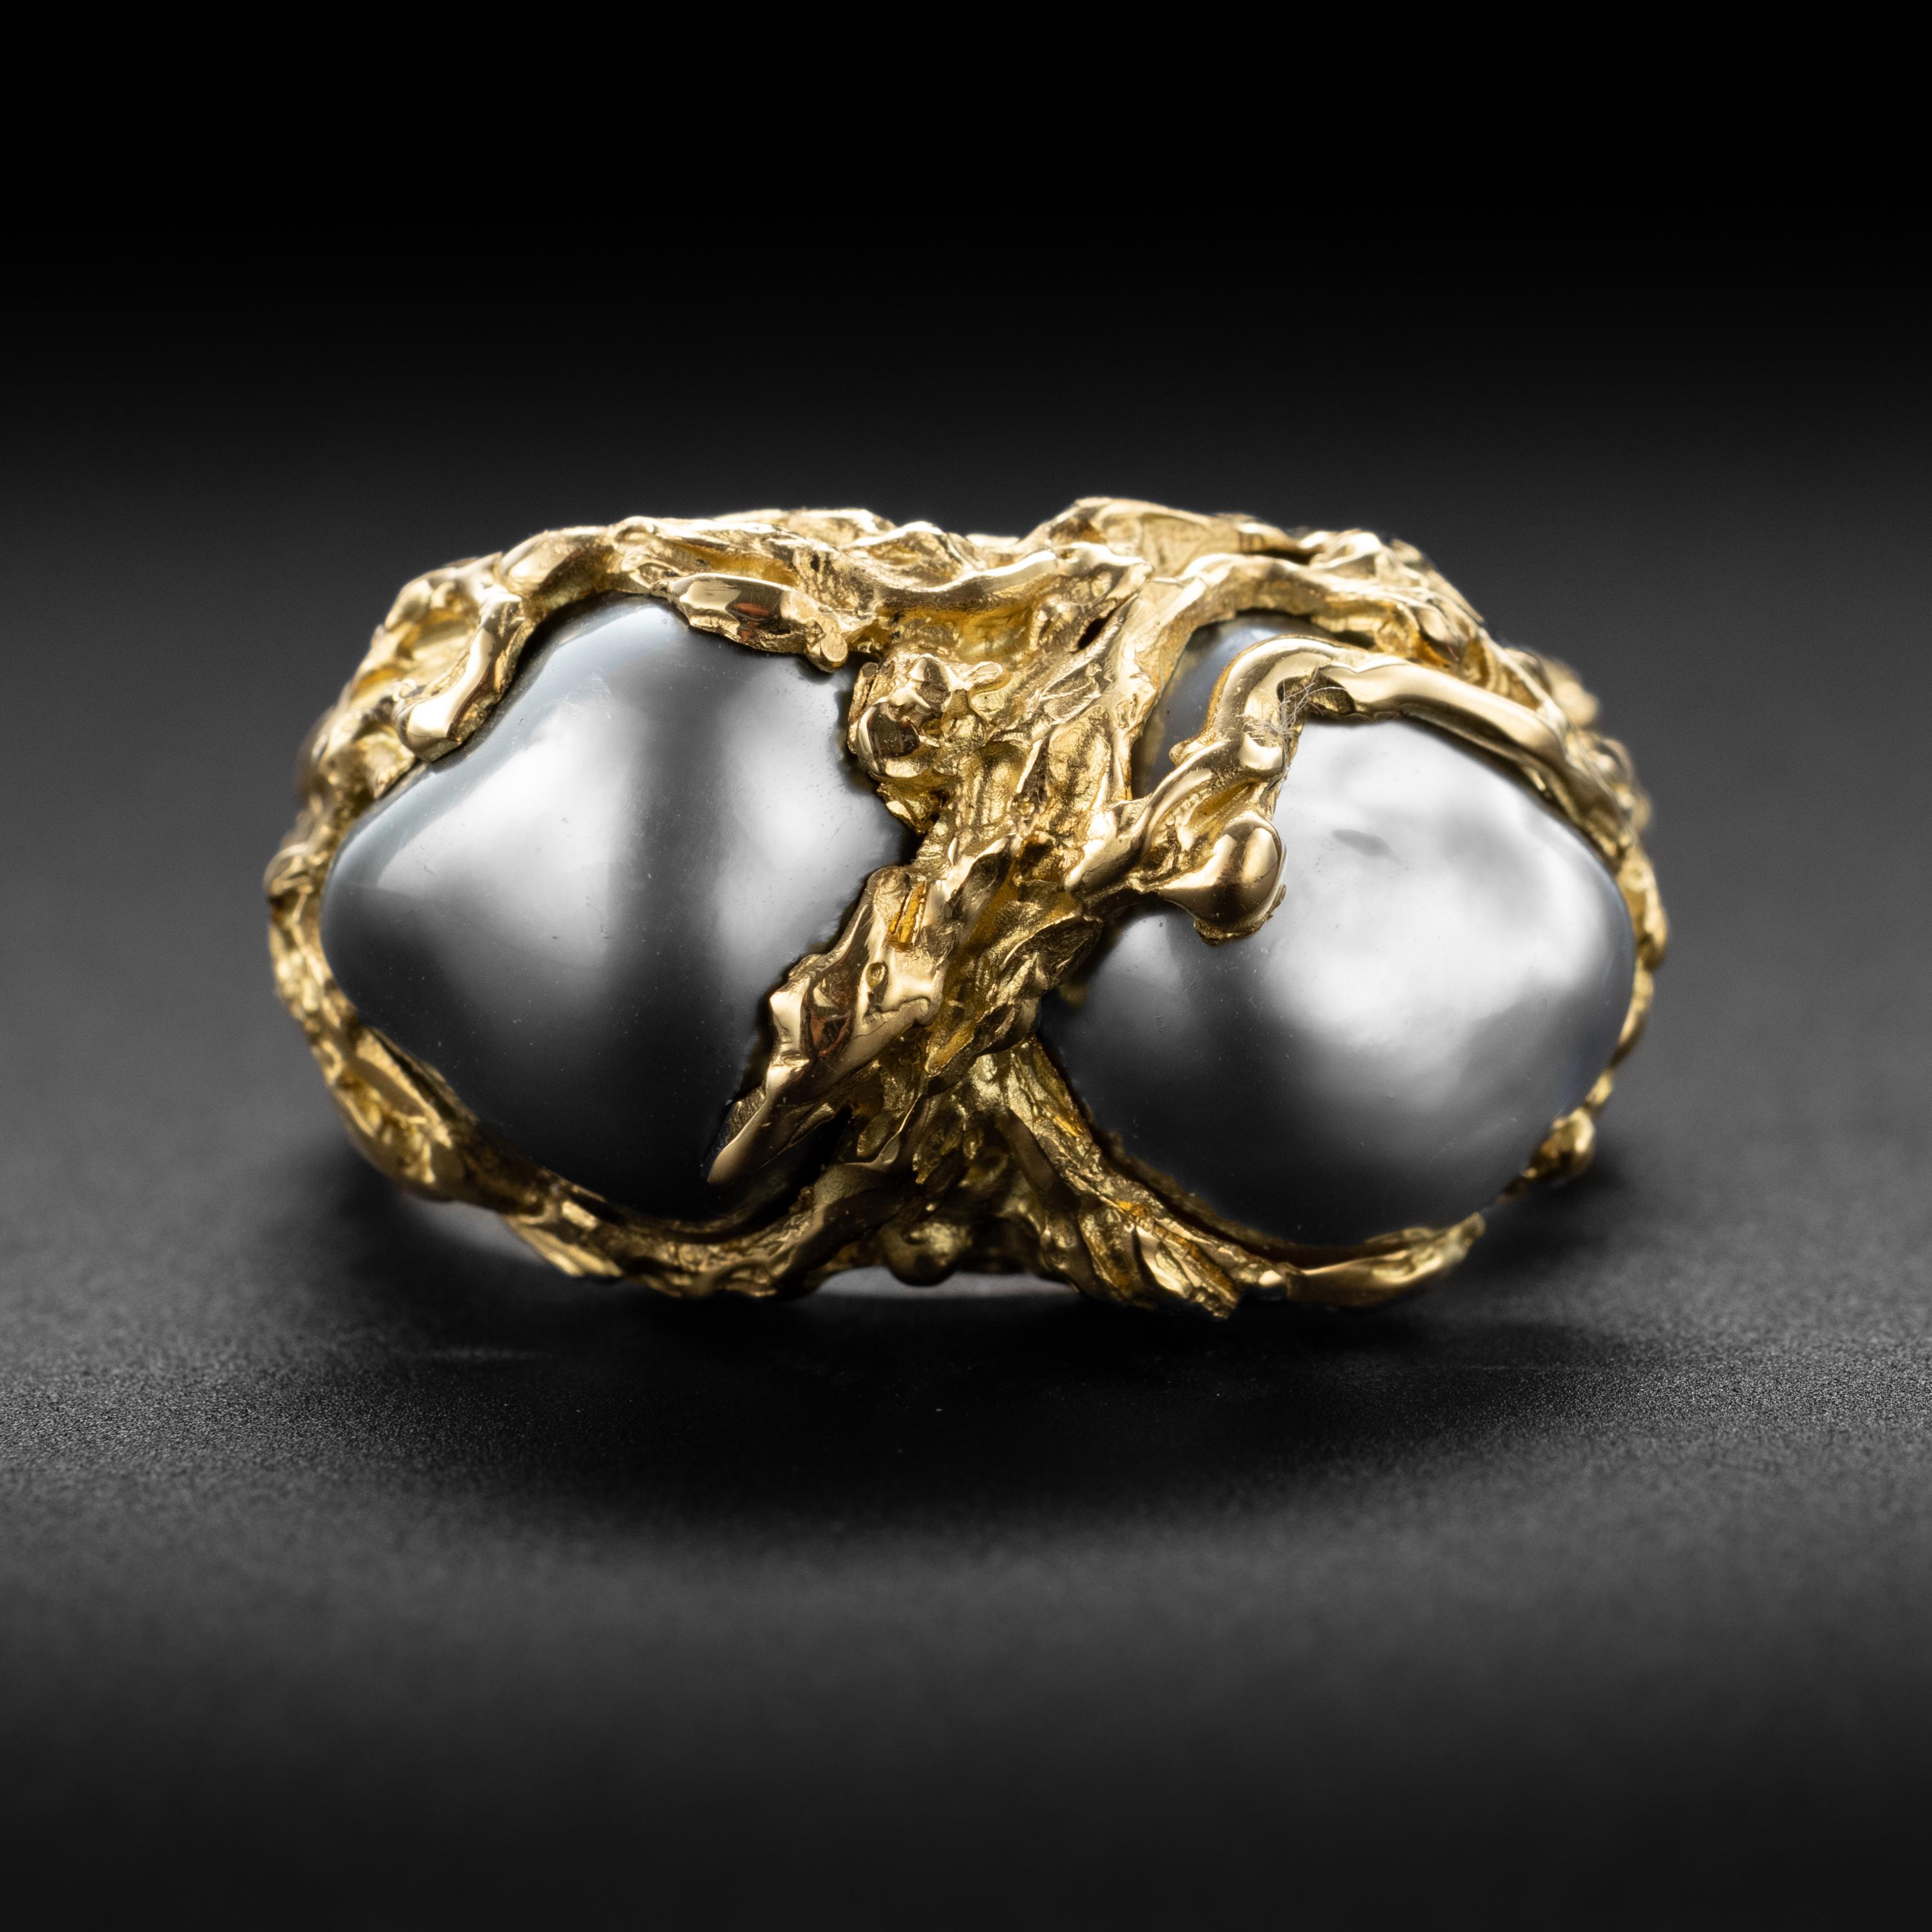 I commissioned this men's pearl ring from a jeweler in Australia because there really aren't any great pearl rings for men. And there ought to be: men have worn pearls throughout history; all the great kings of Europe wore pearls. Only when